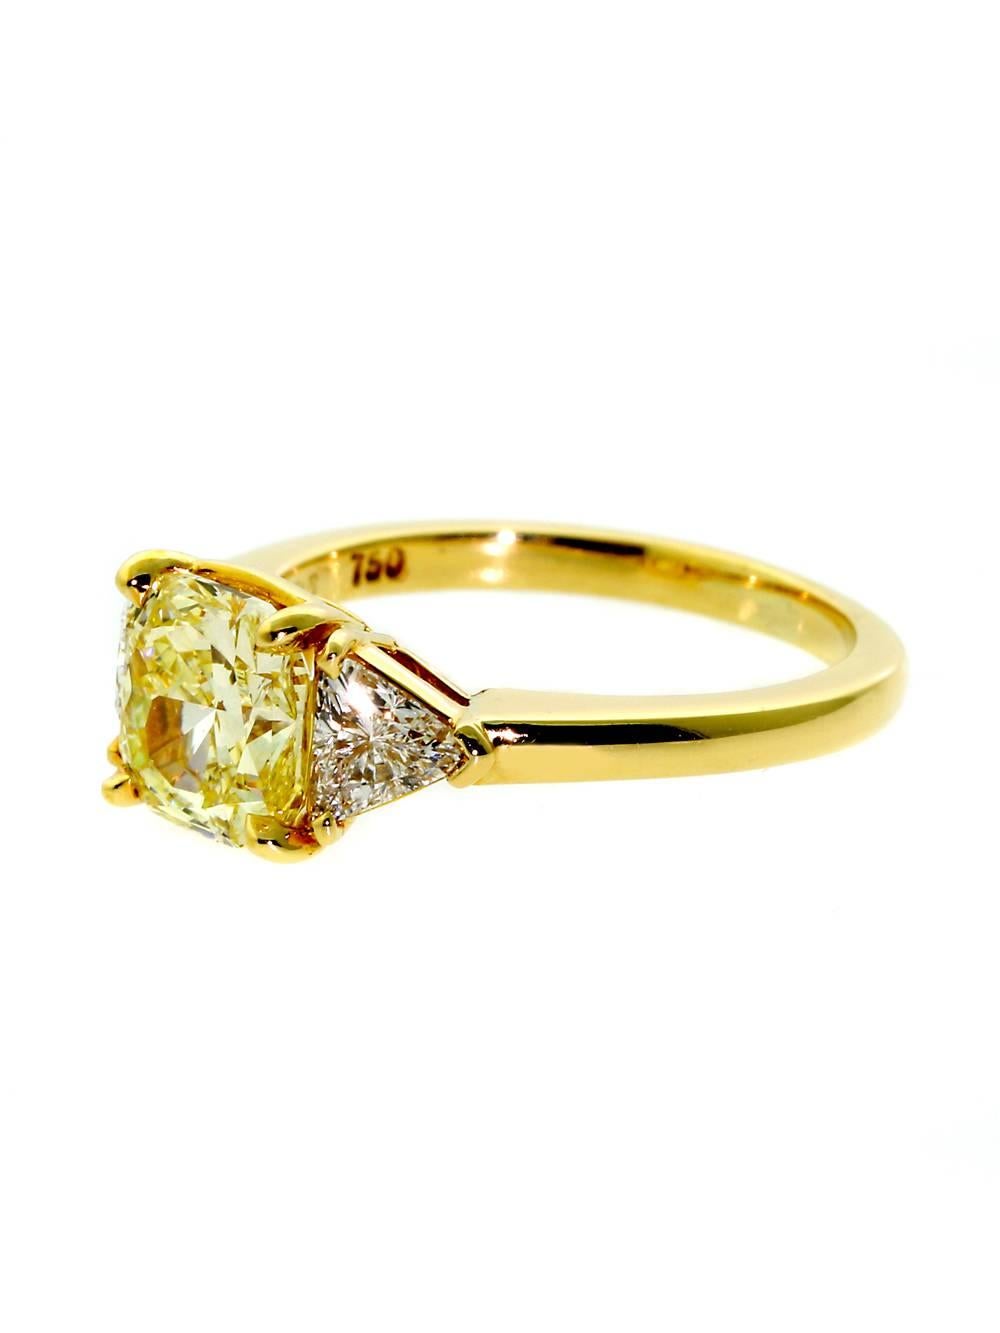 The magnificent centerpiece of this Ring is its 2.10 ct Starburst Cut Vvs1 Fancy Intense Yellow Diamond, symmetrically flanked by .70 ct of matching Vvs2 E-F Color Trillion Cut Diamonds. 

Size: 6 1/2 (Resizeable)

Accessories: Cartier Gift Box,